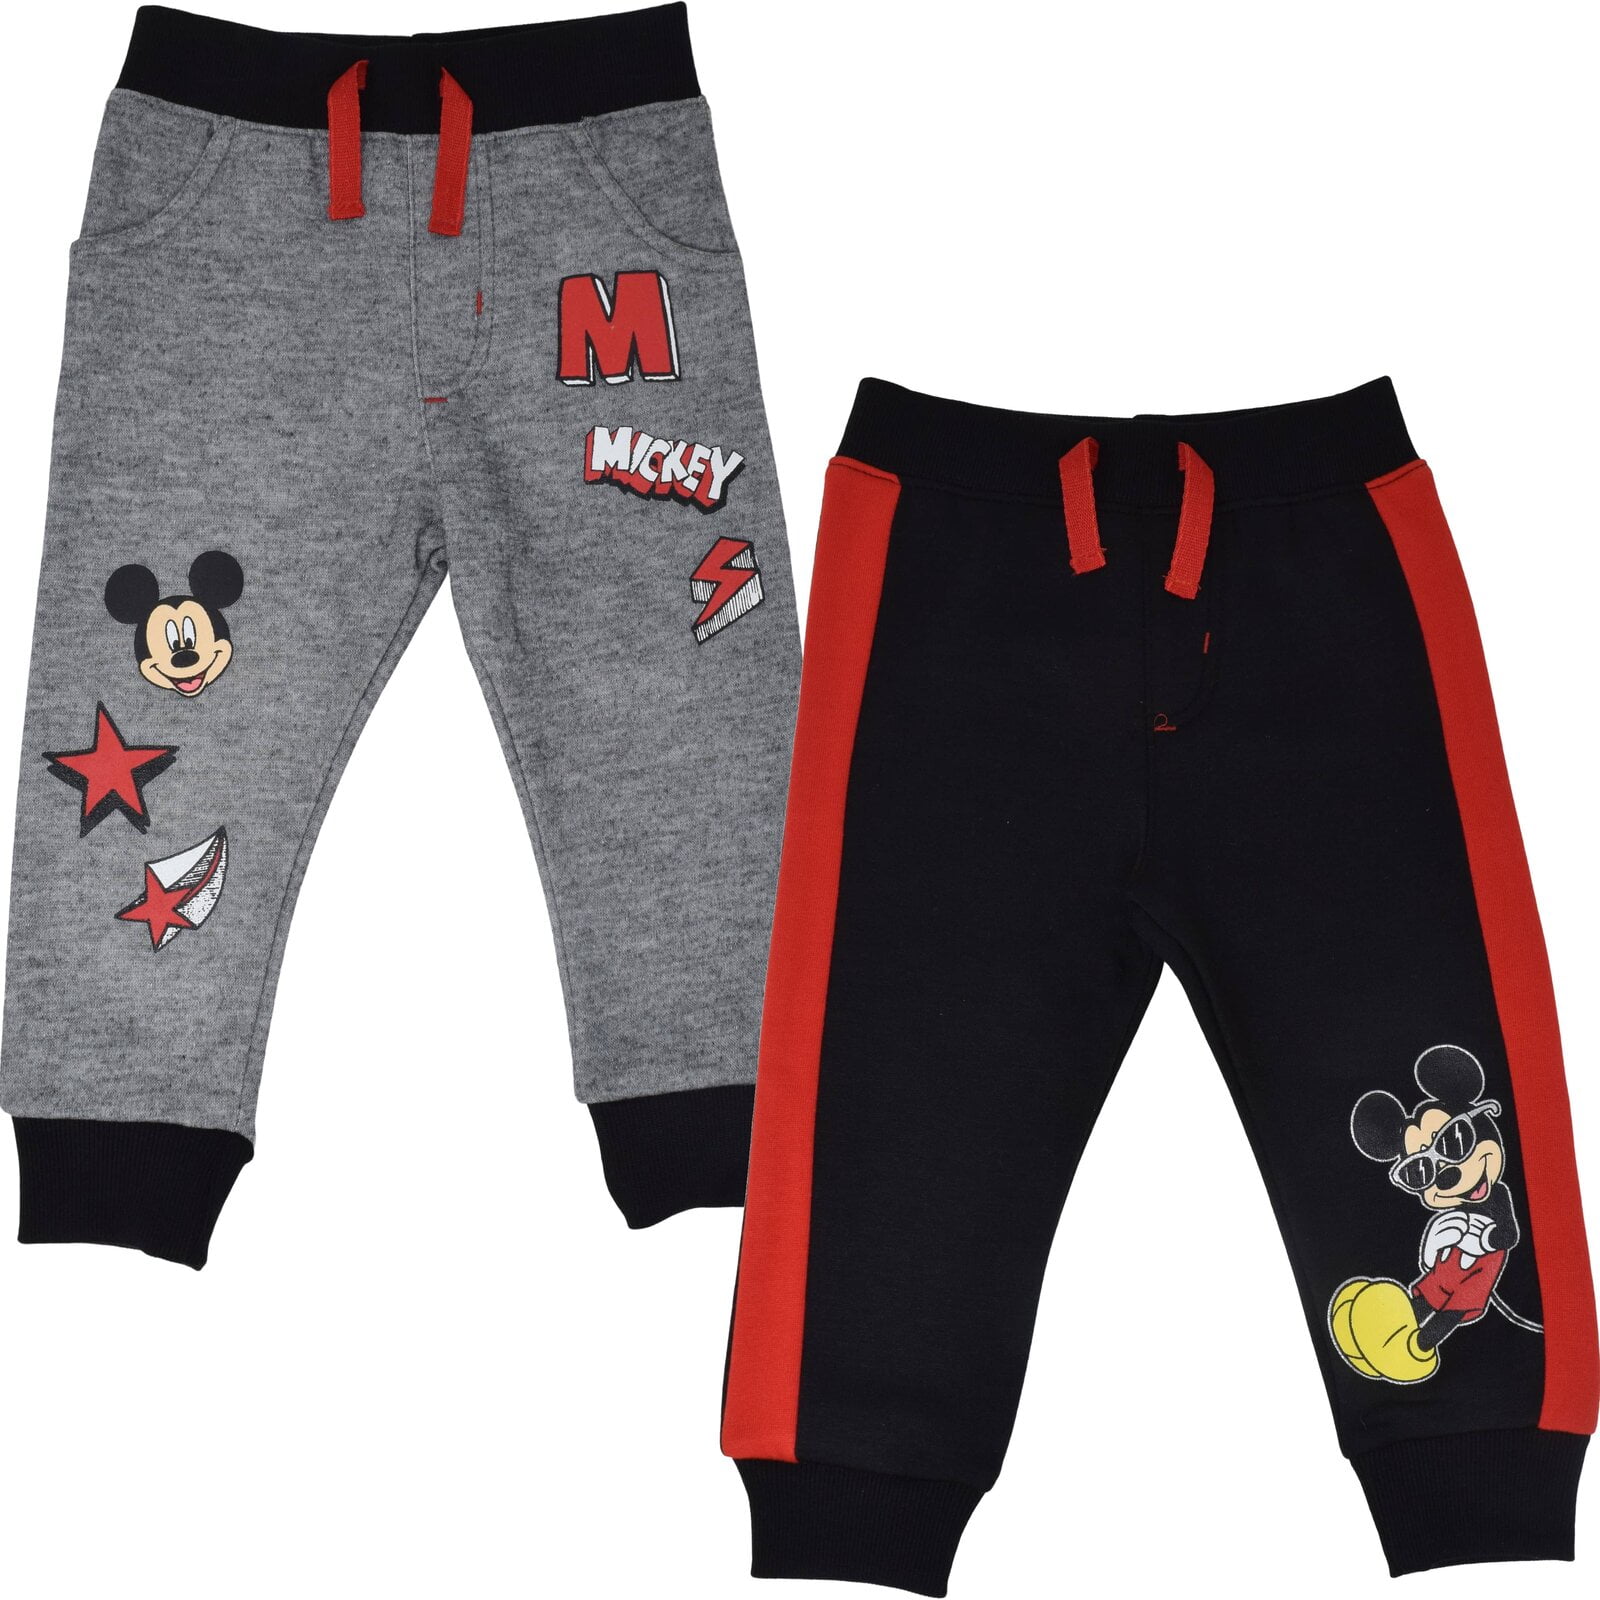 Comparar Certificado usuario Disney Mickey Mouse Toddler Boys 2 Pack Pants Infant to Little Kid -  Walmart.com